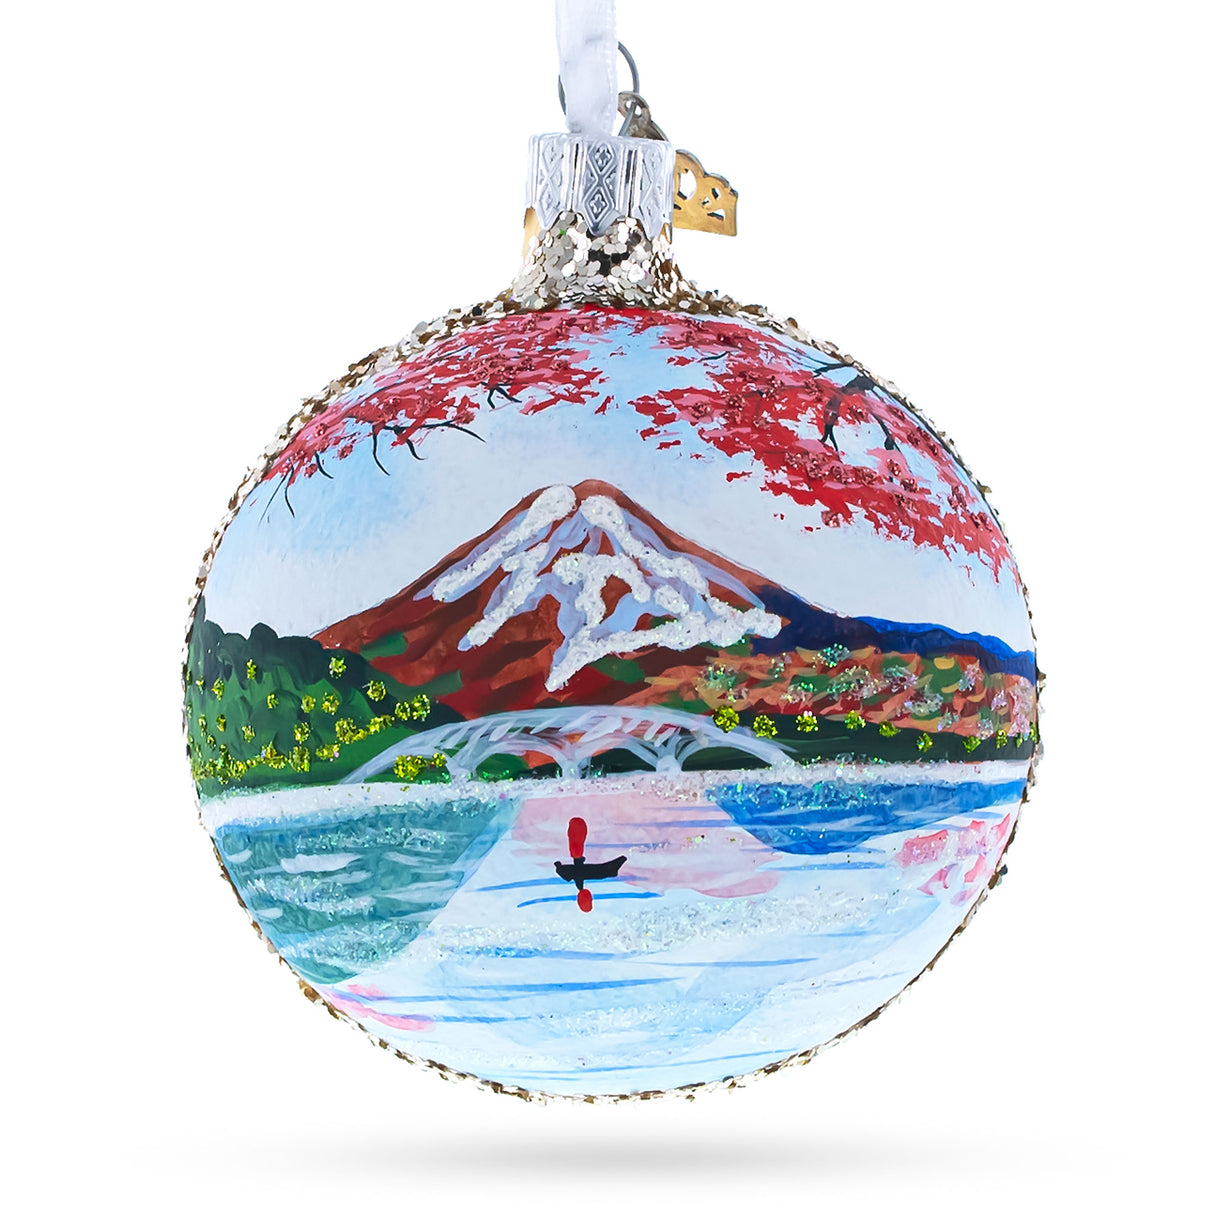 Glass Mount Fuji, Japan Glass Ball Christmas Ornament 3.25 Inches in Multi color Round